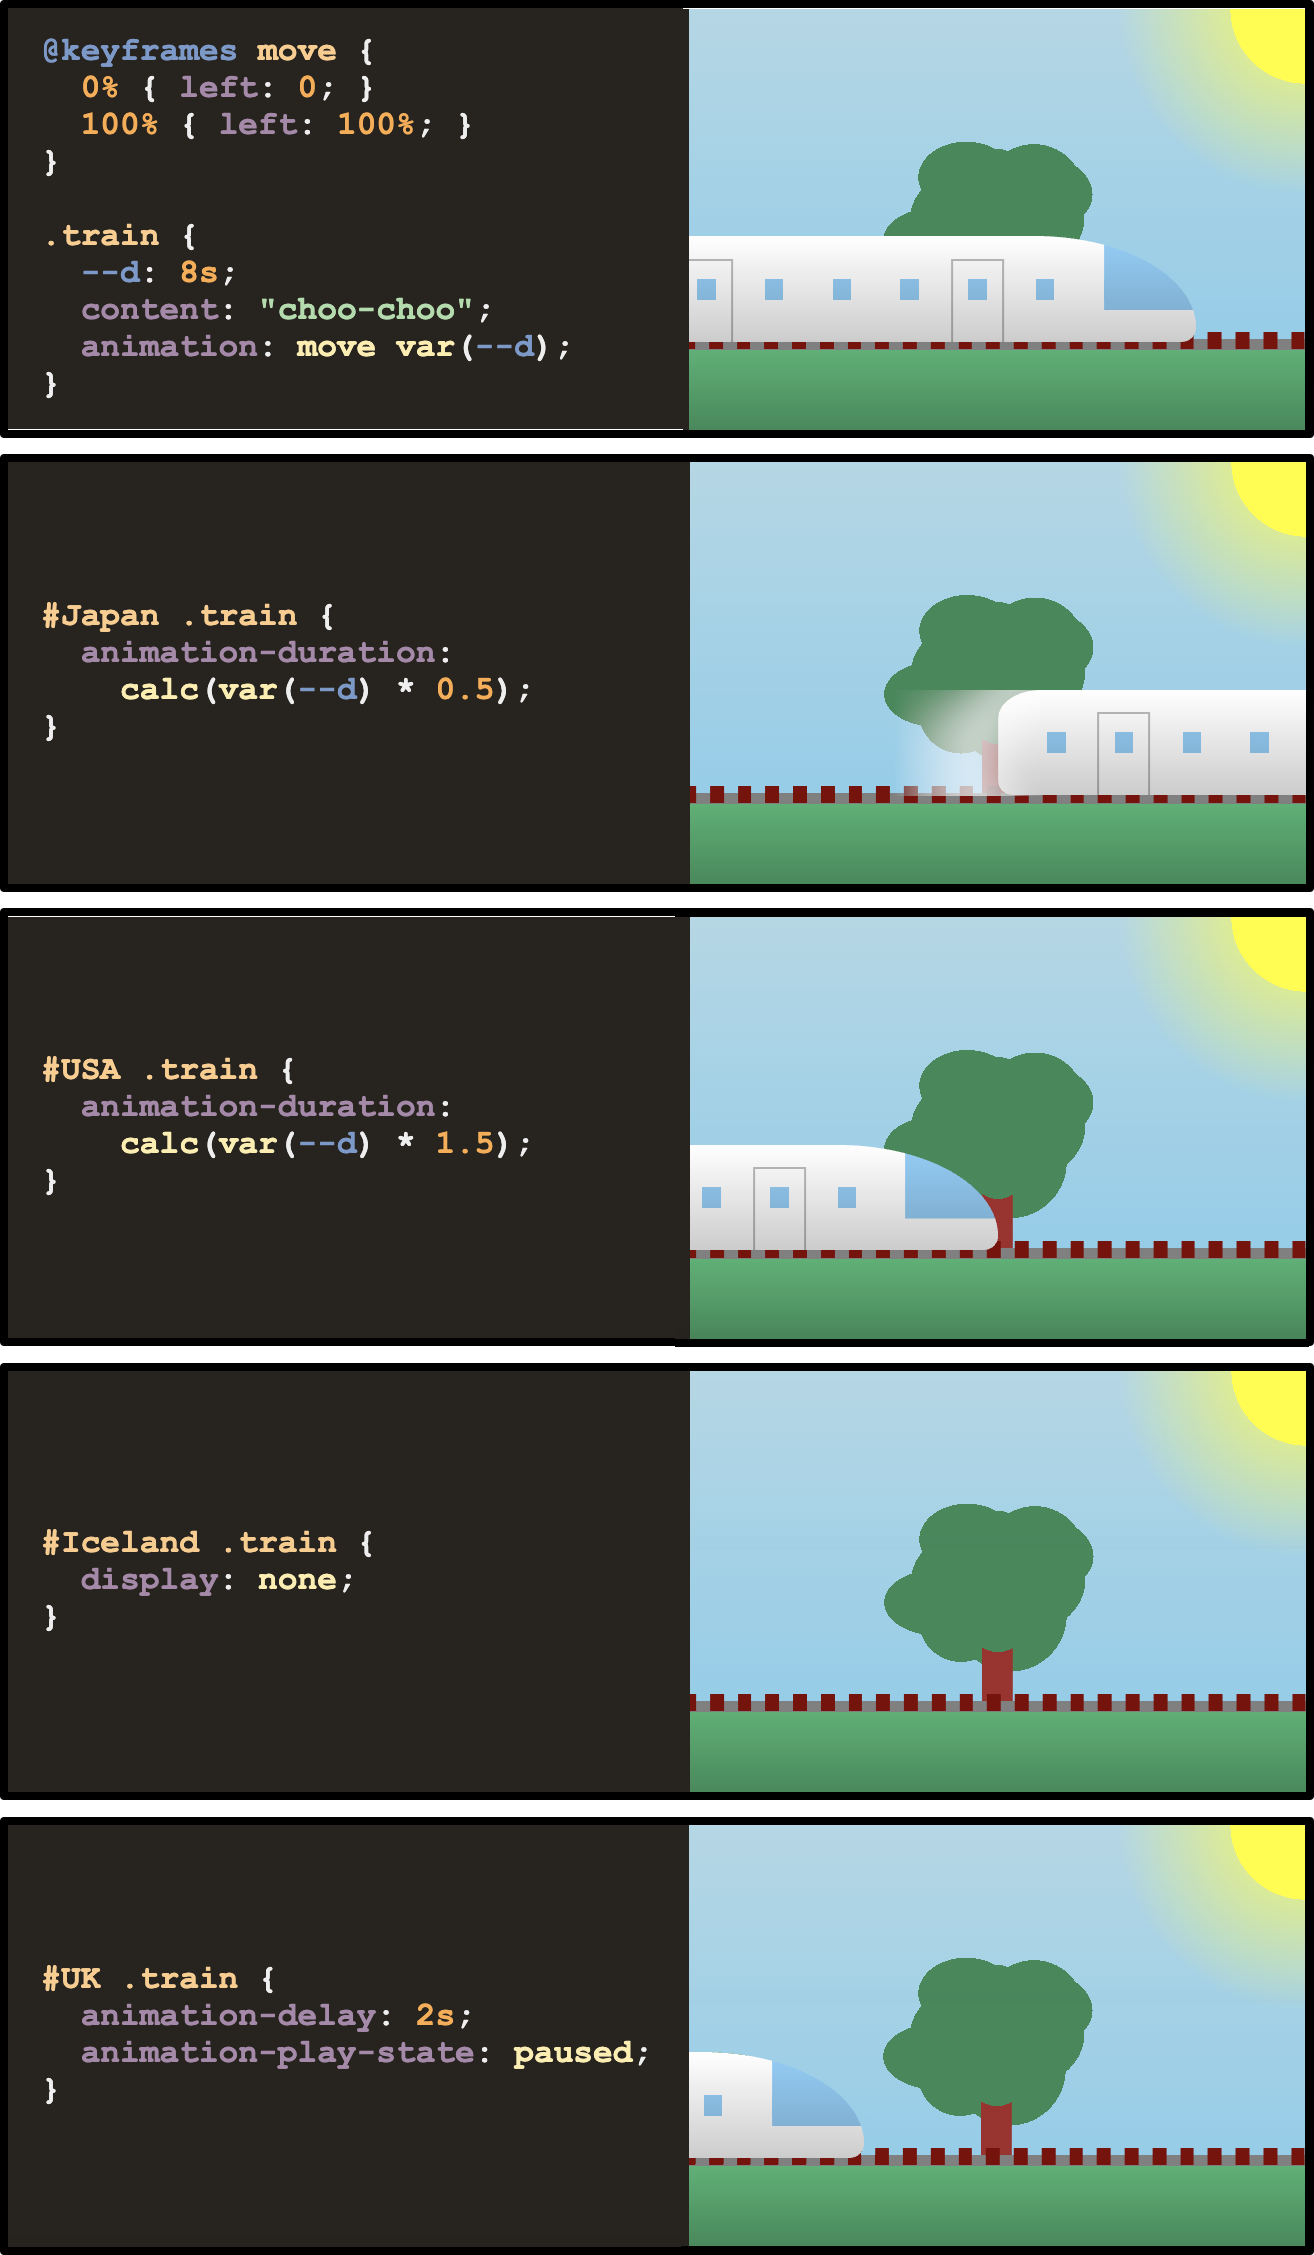 Cartoon with 5 panels divided in two parts, one showing CSS code and the other a landscape with a train. The first panel code is an animation from left 0 to 100% applied to an element of class .train with a duration of 8s. The second panel is for a #Japan .train, the duration is 0.7 the regular duration. The third panel is for a #USA .train, the duration is 1.5 the regular duration. The fourth panel is for a #Iceland .train, it has a display none and no train is displayed. The last panel is for #UK .train, it has am animation delay of 2s and the animation-play-state is 'paused'.